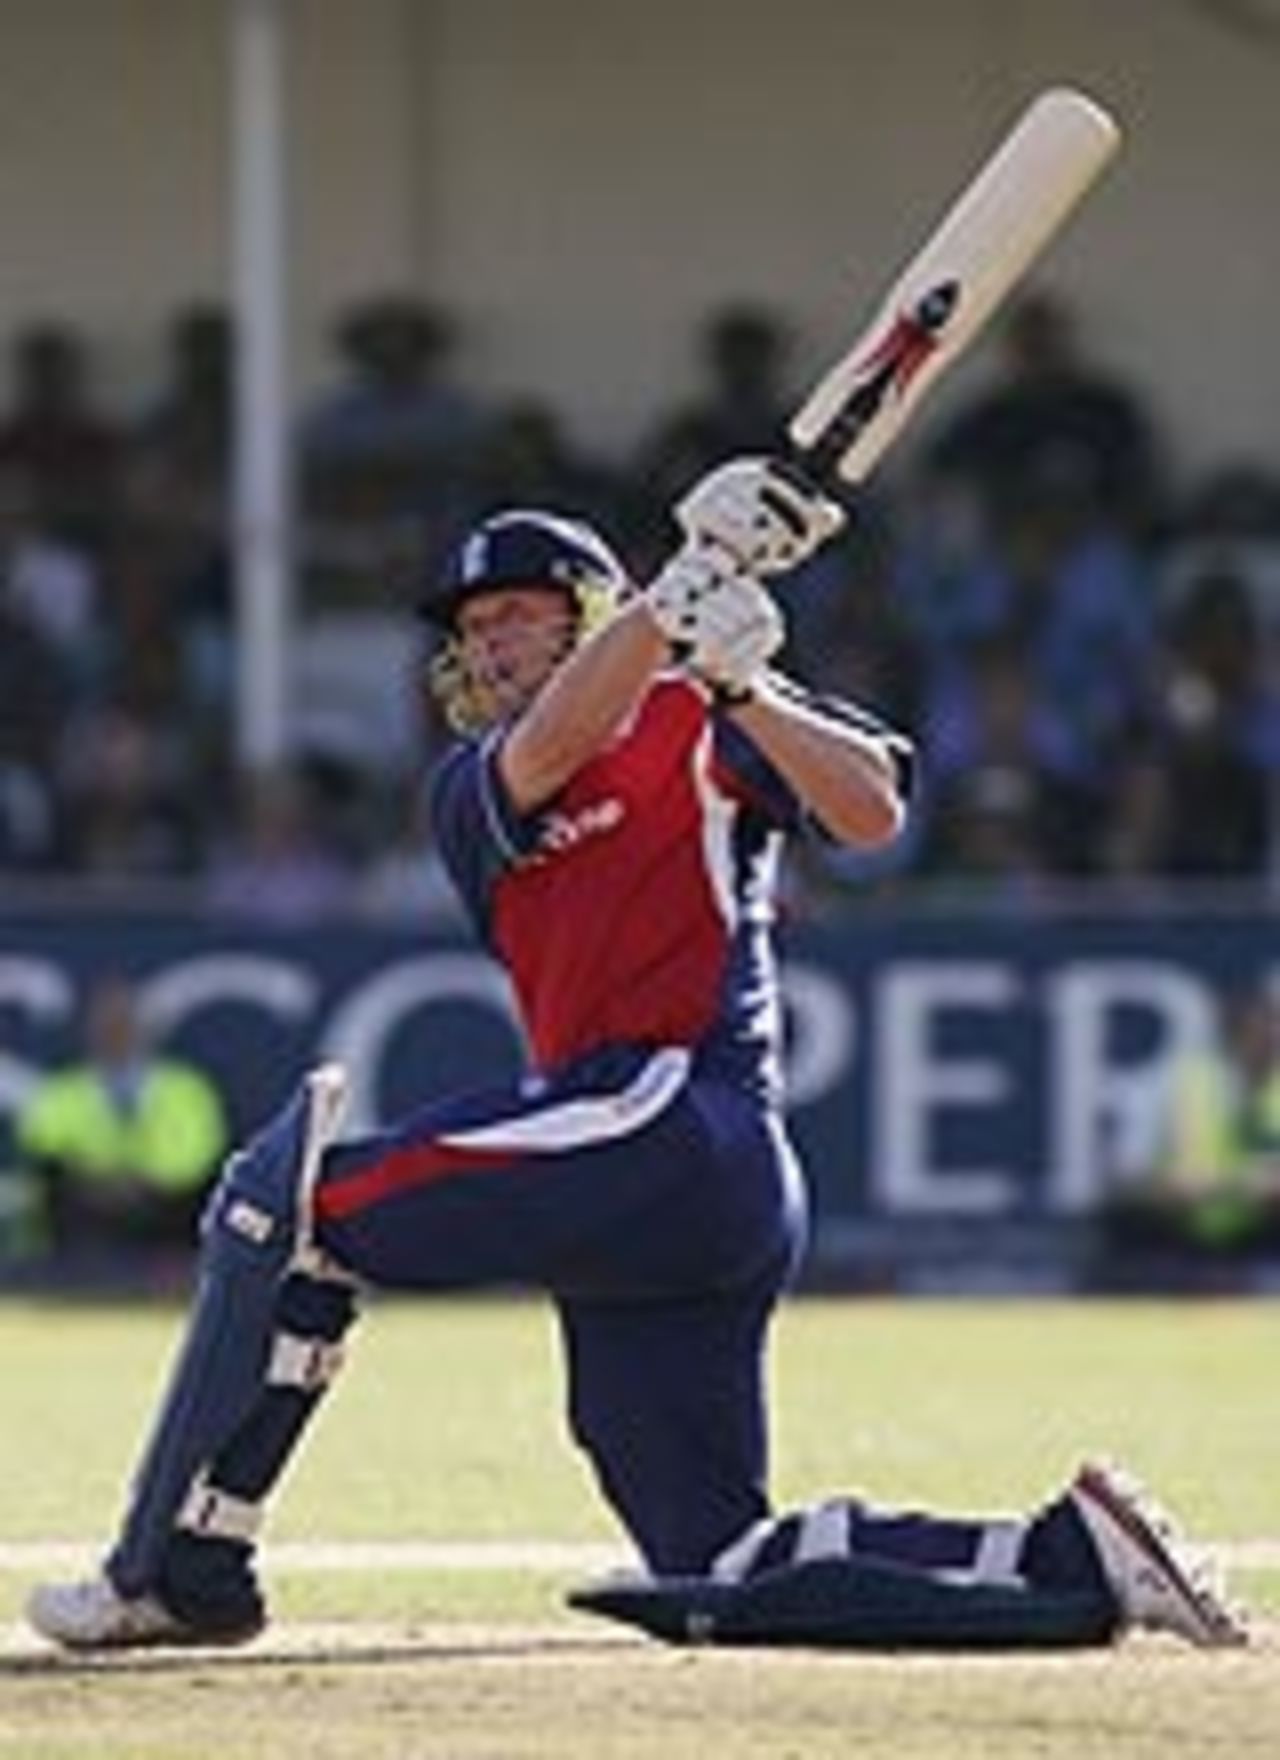 Andrew Flintoff clubs a huge six during the first one-day international at Trent Bridge, England v India, NatWest Challenge, September 1, 2004